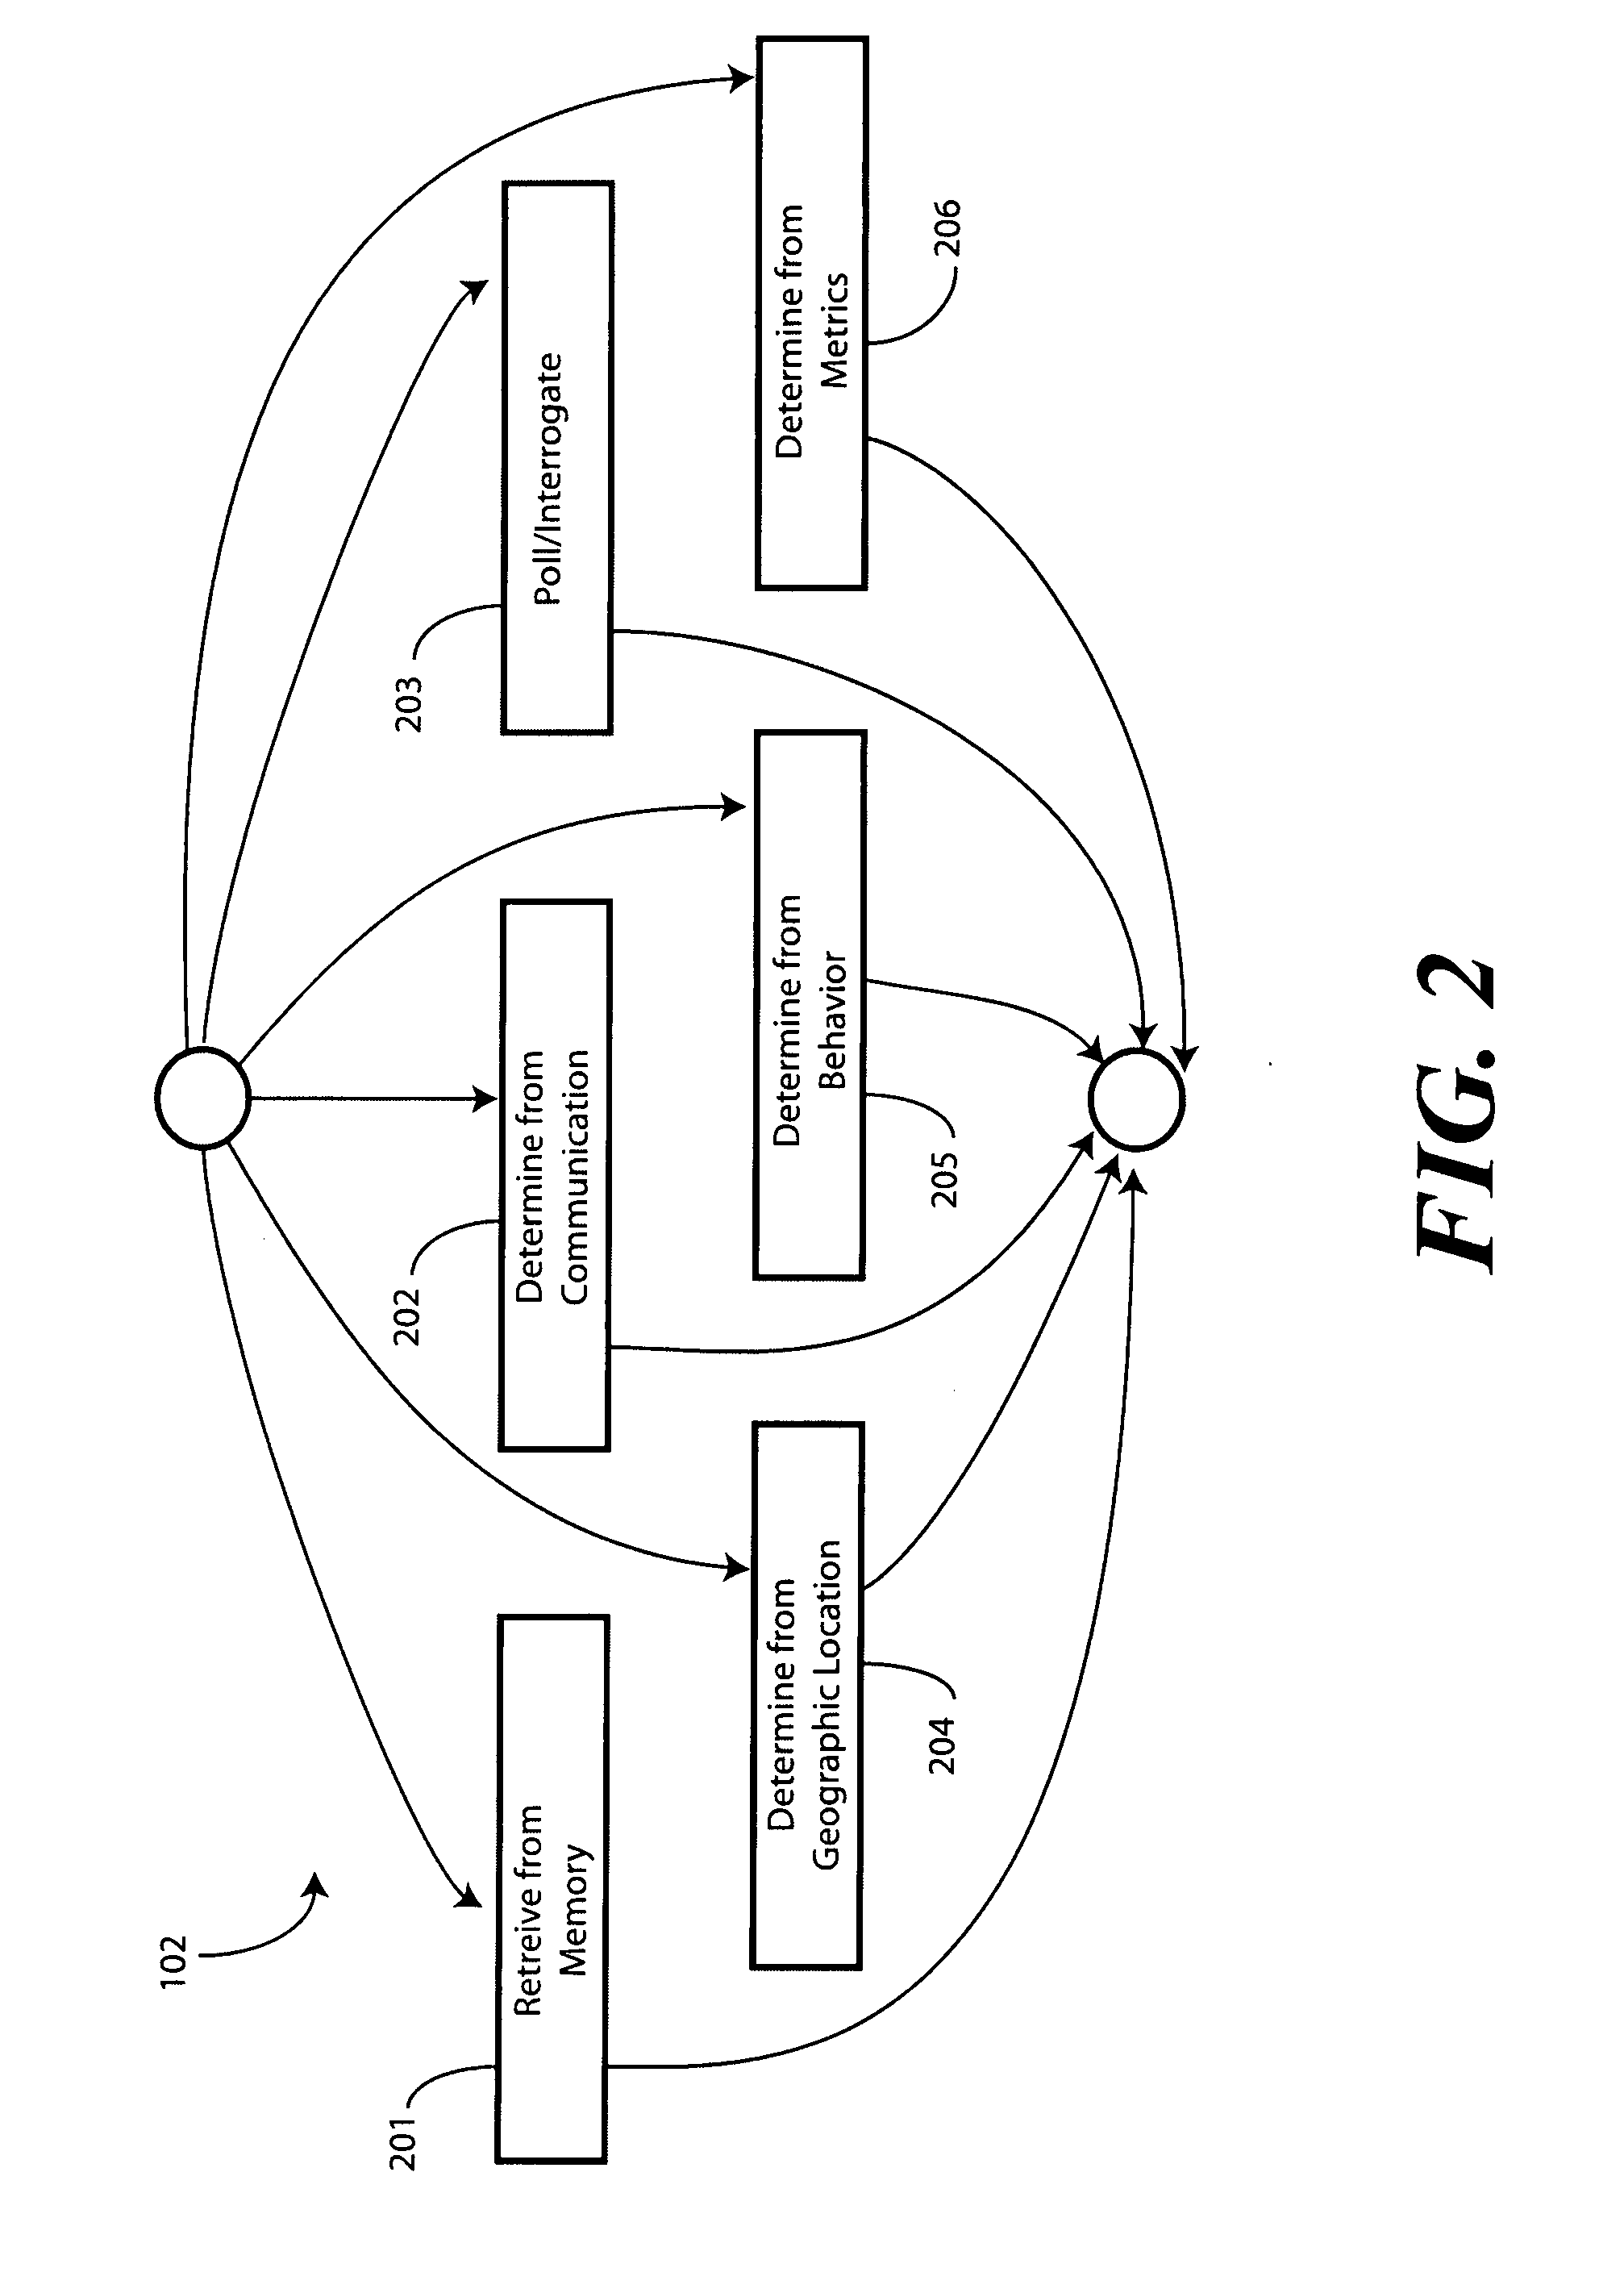 Method and Apparatus for Determining a Group Preference in a Social Network